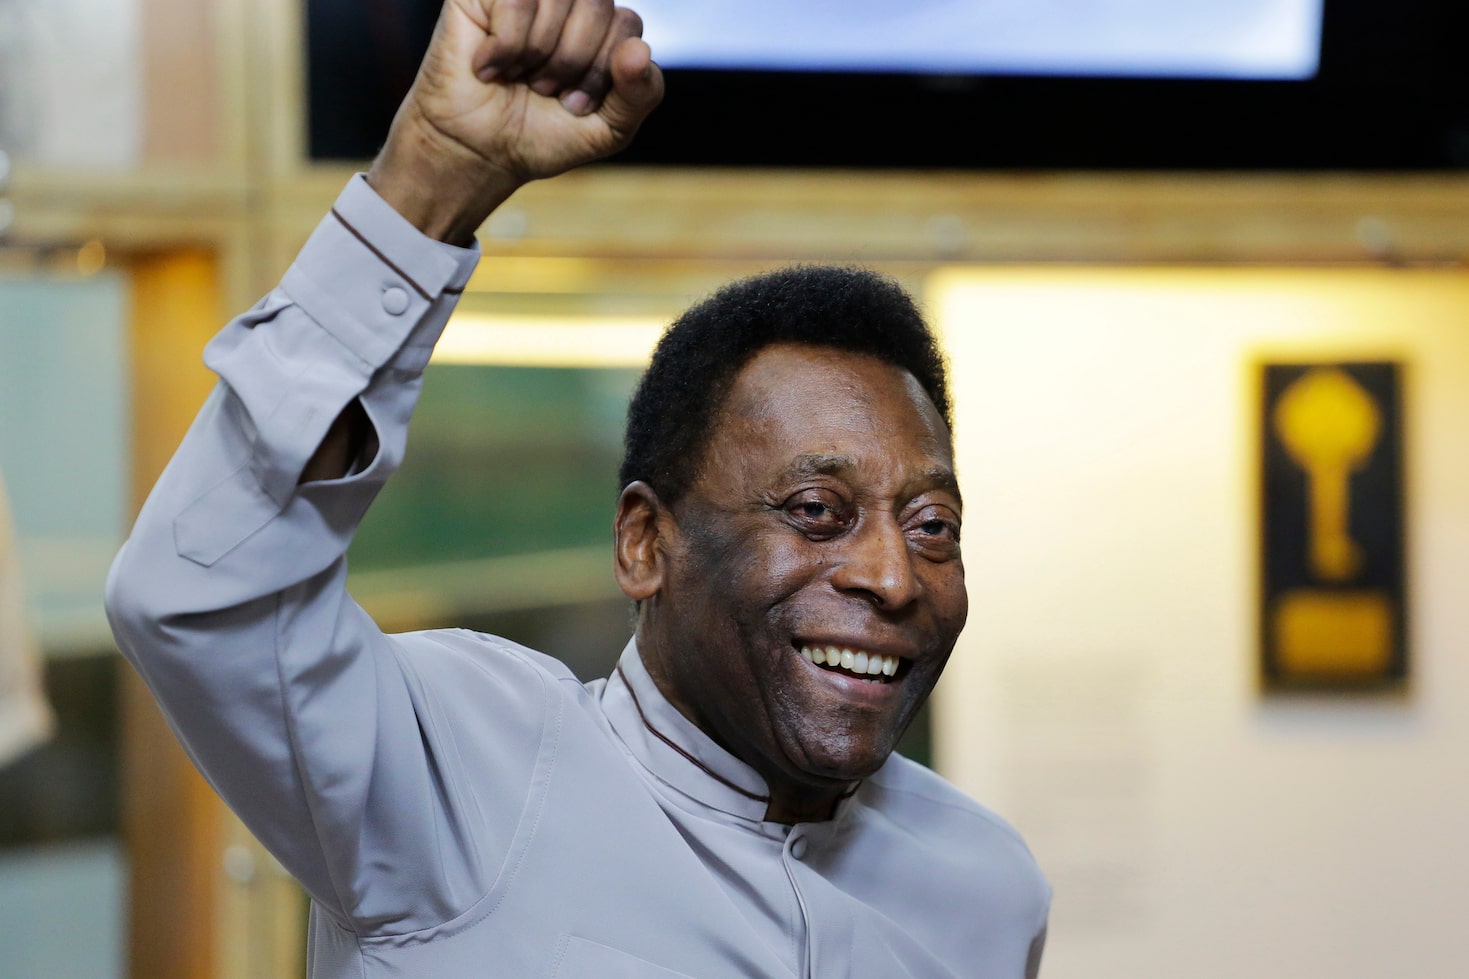 Pele won a World Cup as Brazil's number 10